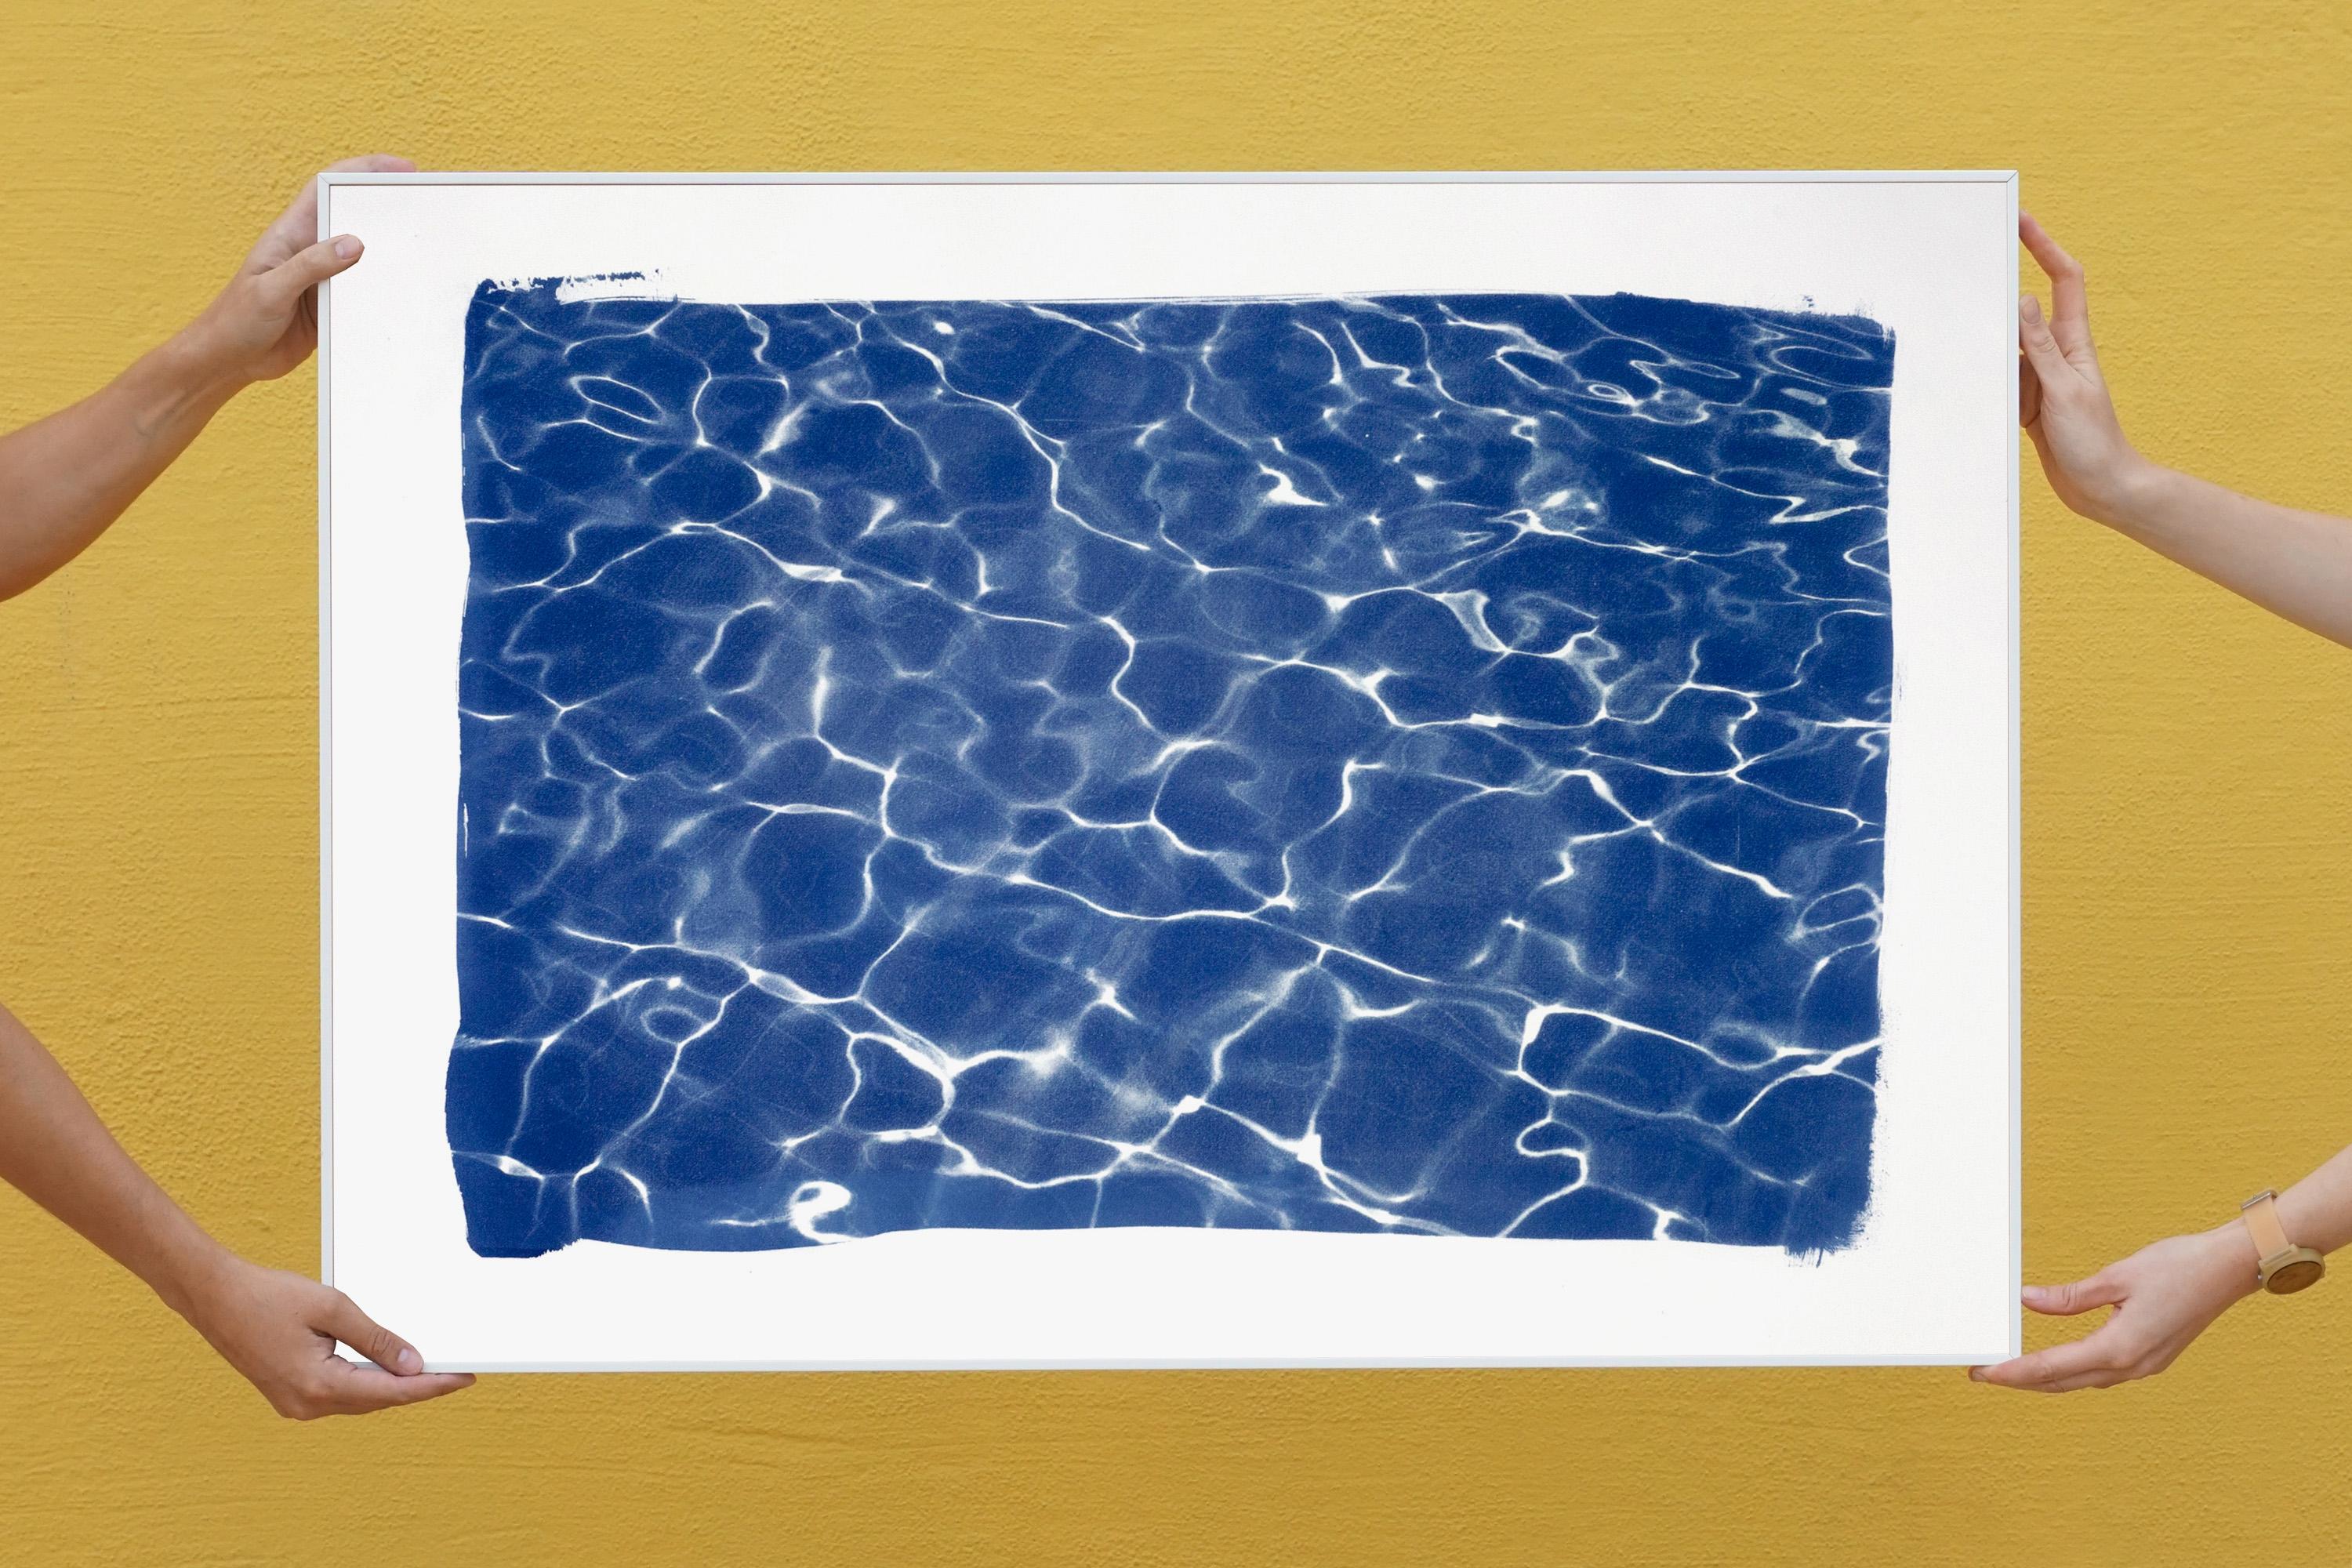 Hollywood Pool House Glow, Exclusive Handmade Cyanotype Print of Blue Patterns - Contemporary Art by Kind of Cyan